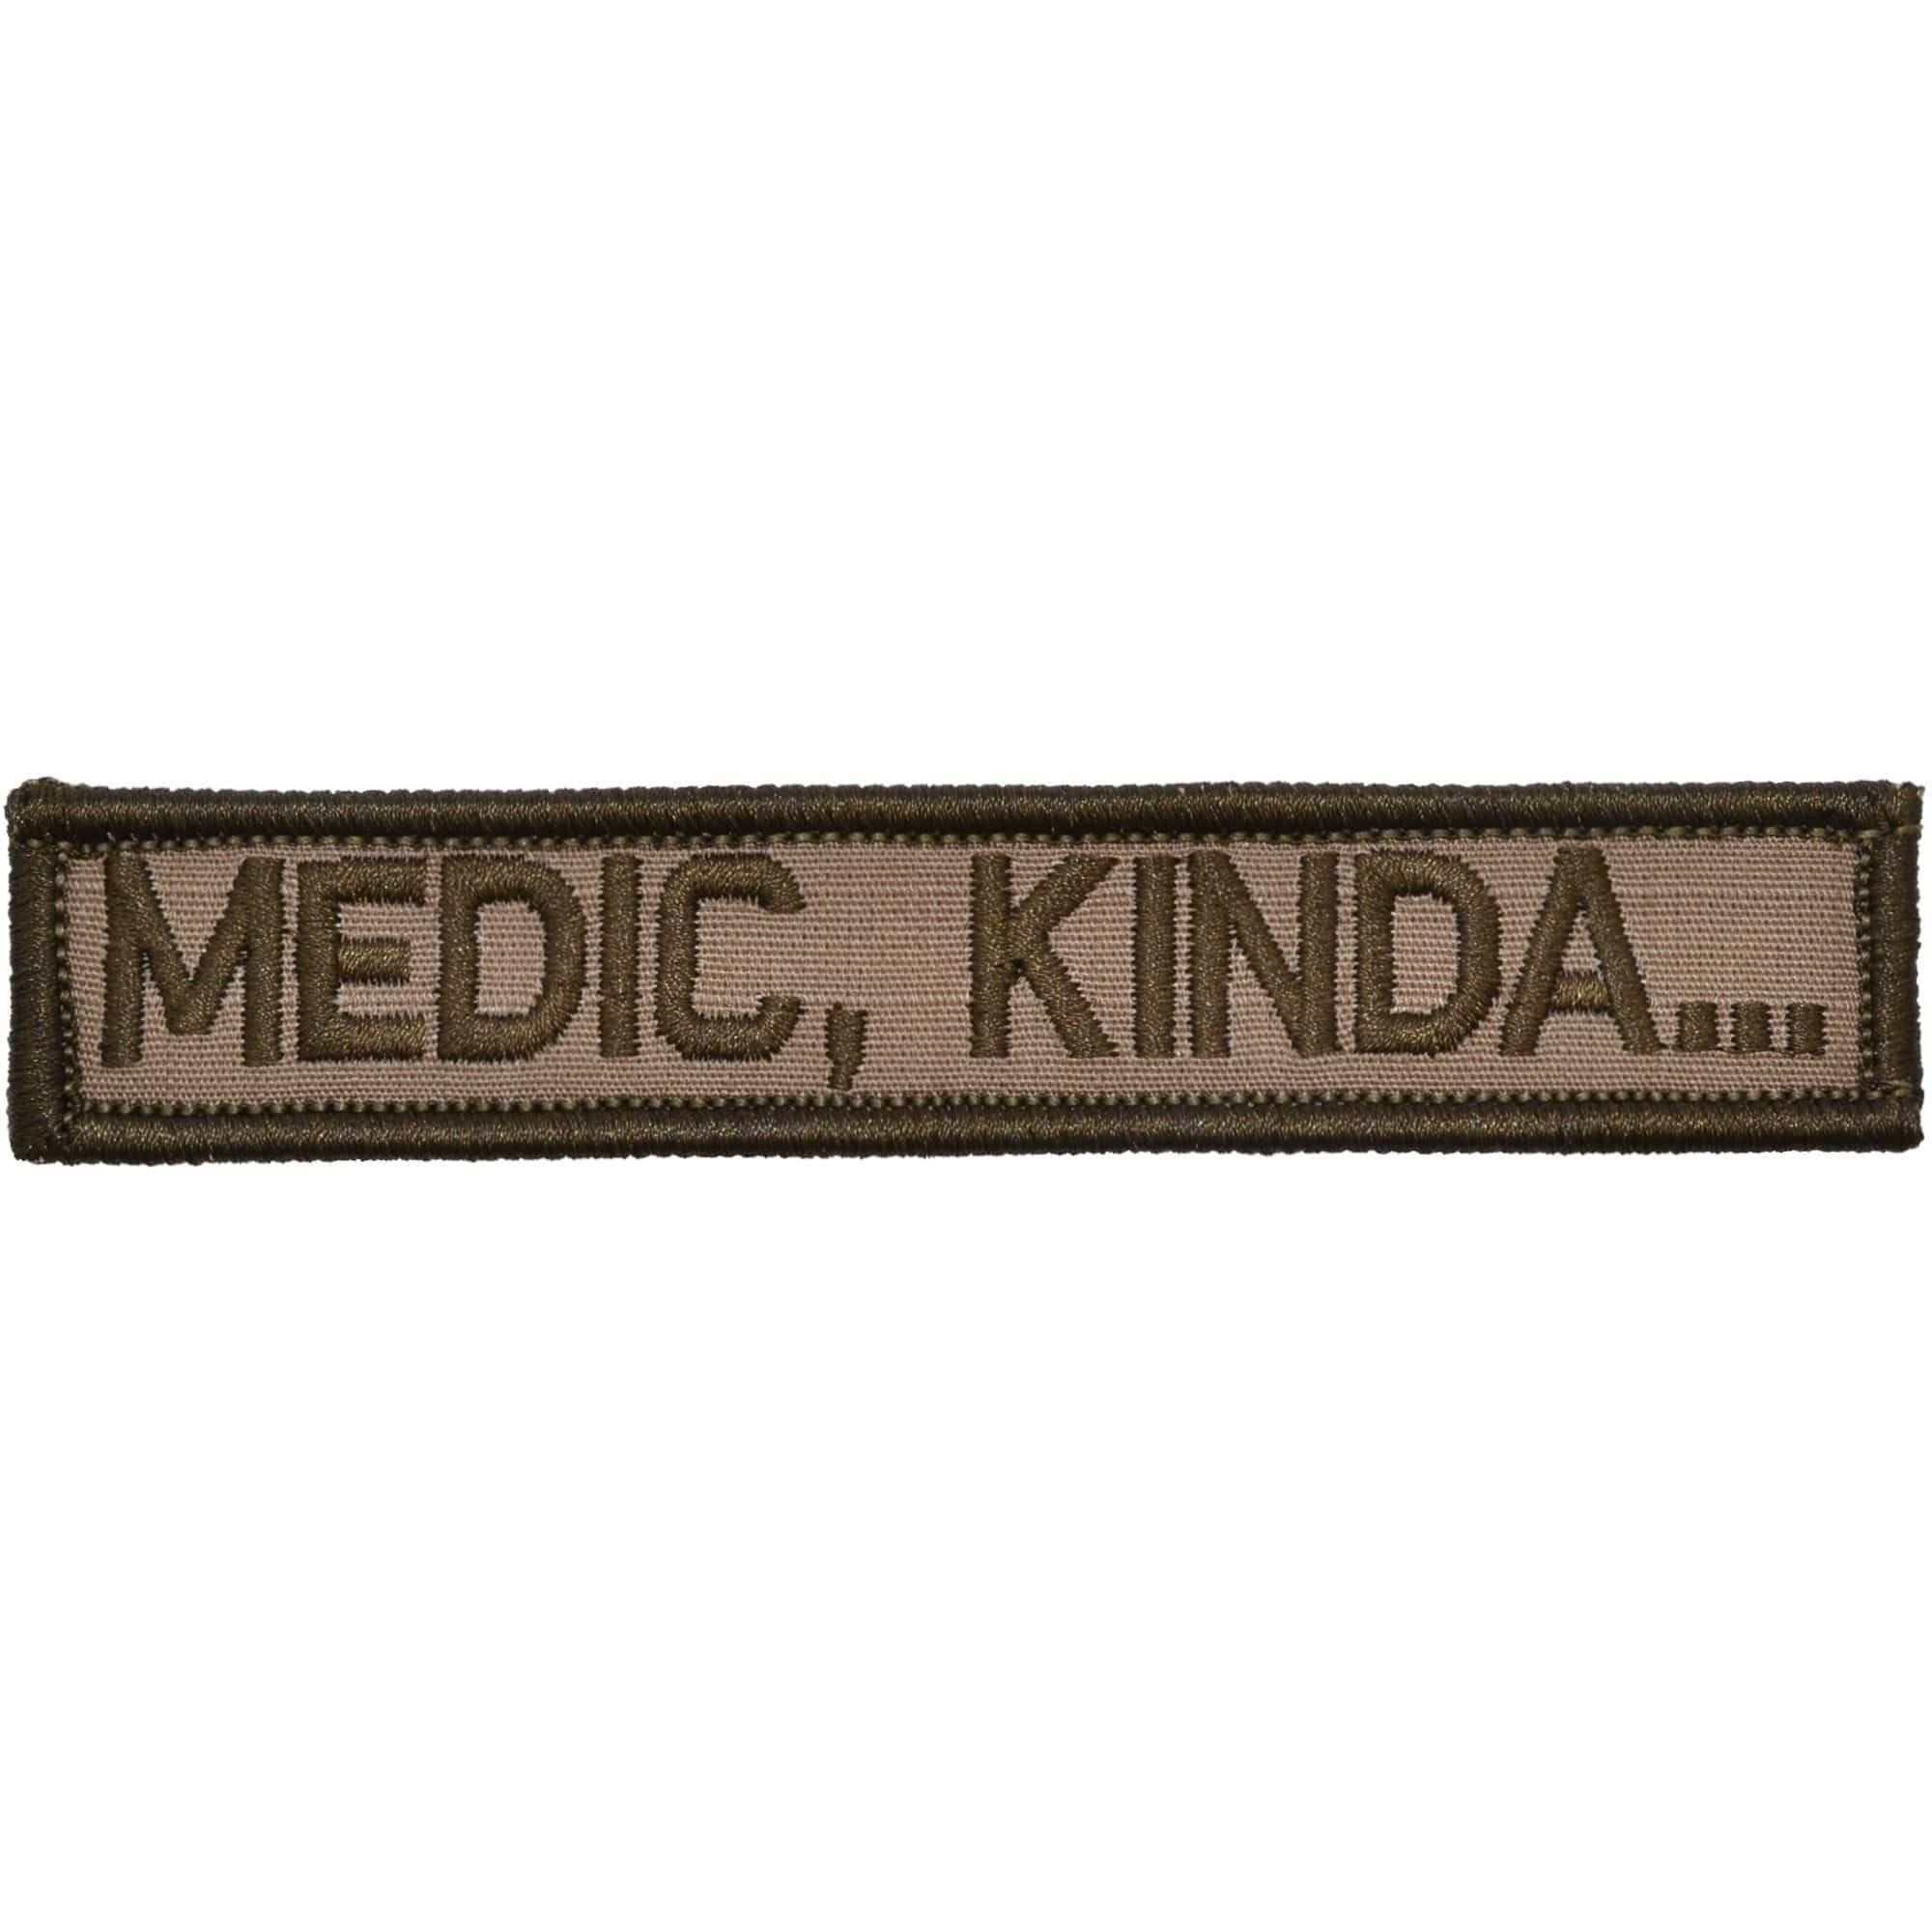 Tactical Gear Junkie Patches Coyote Brown Medic, Kinda... - 1x5 Patch